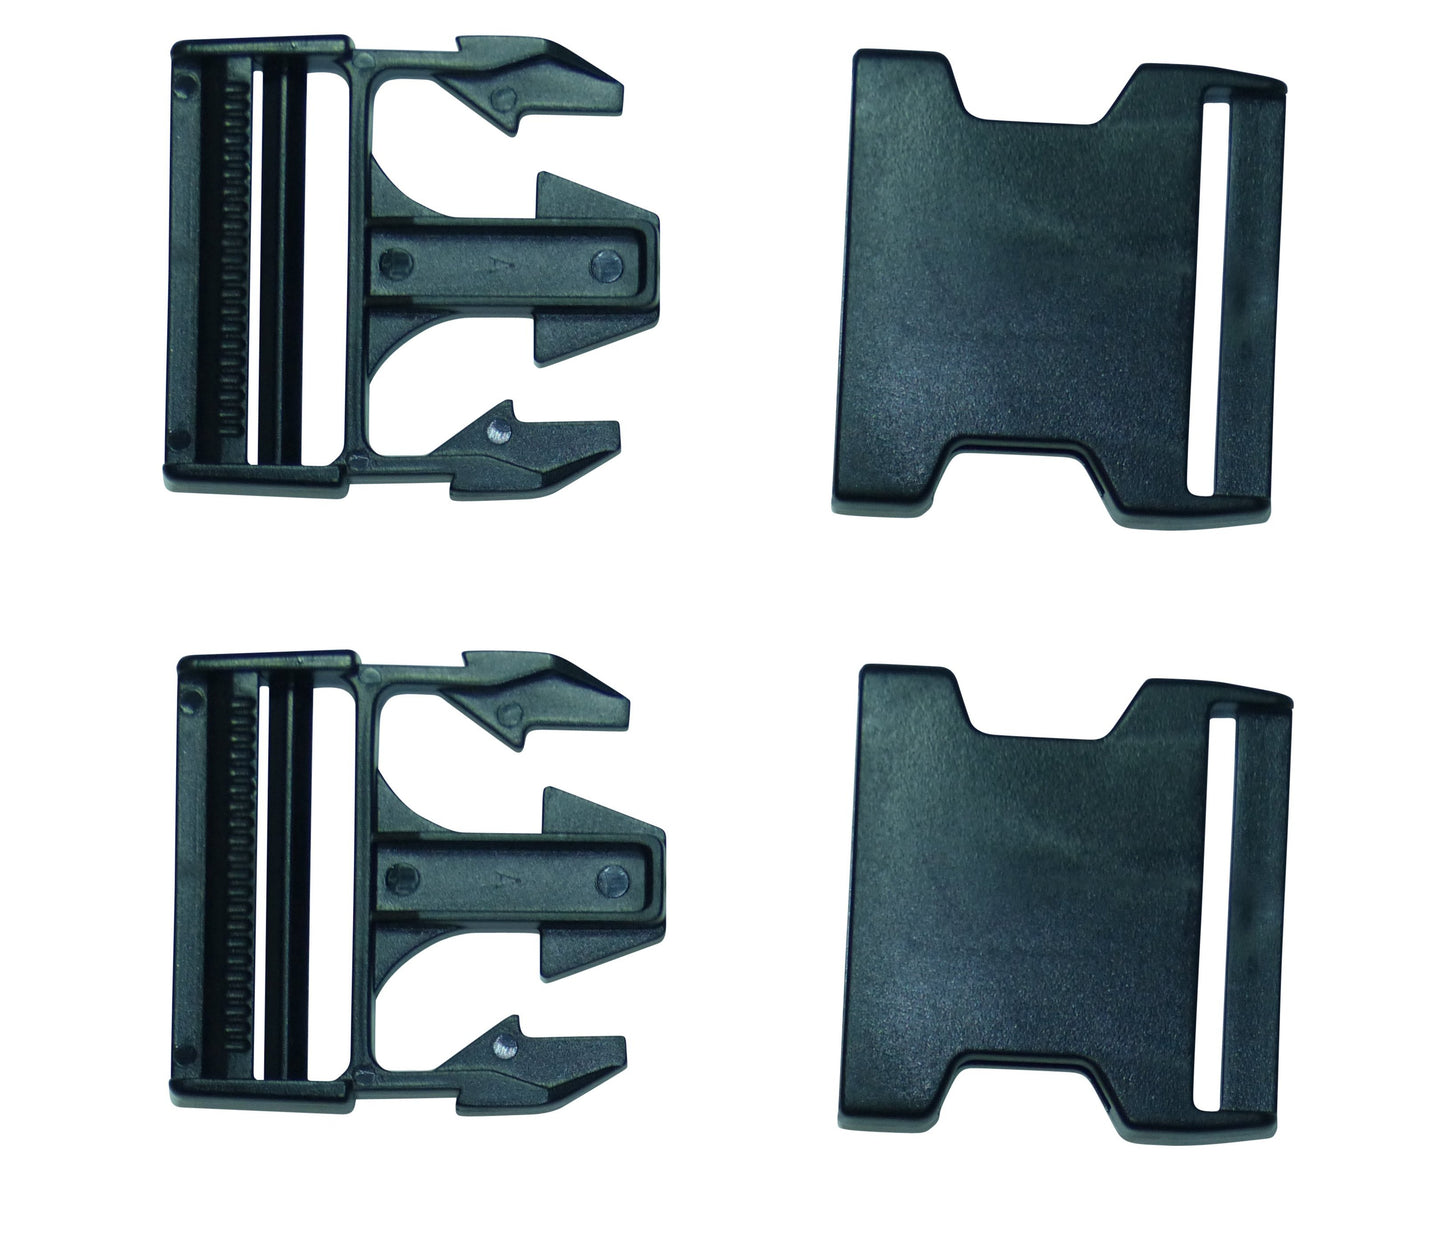 Benristraps 50mm plastic quick release buckle opened